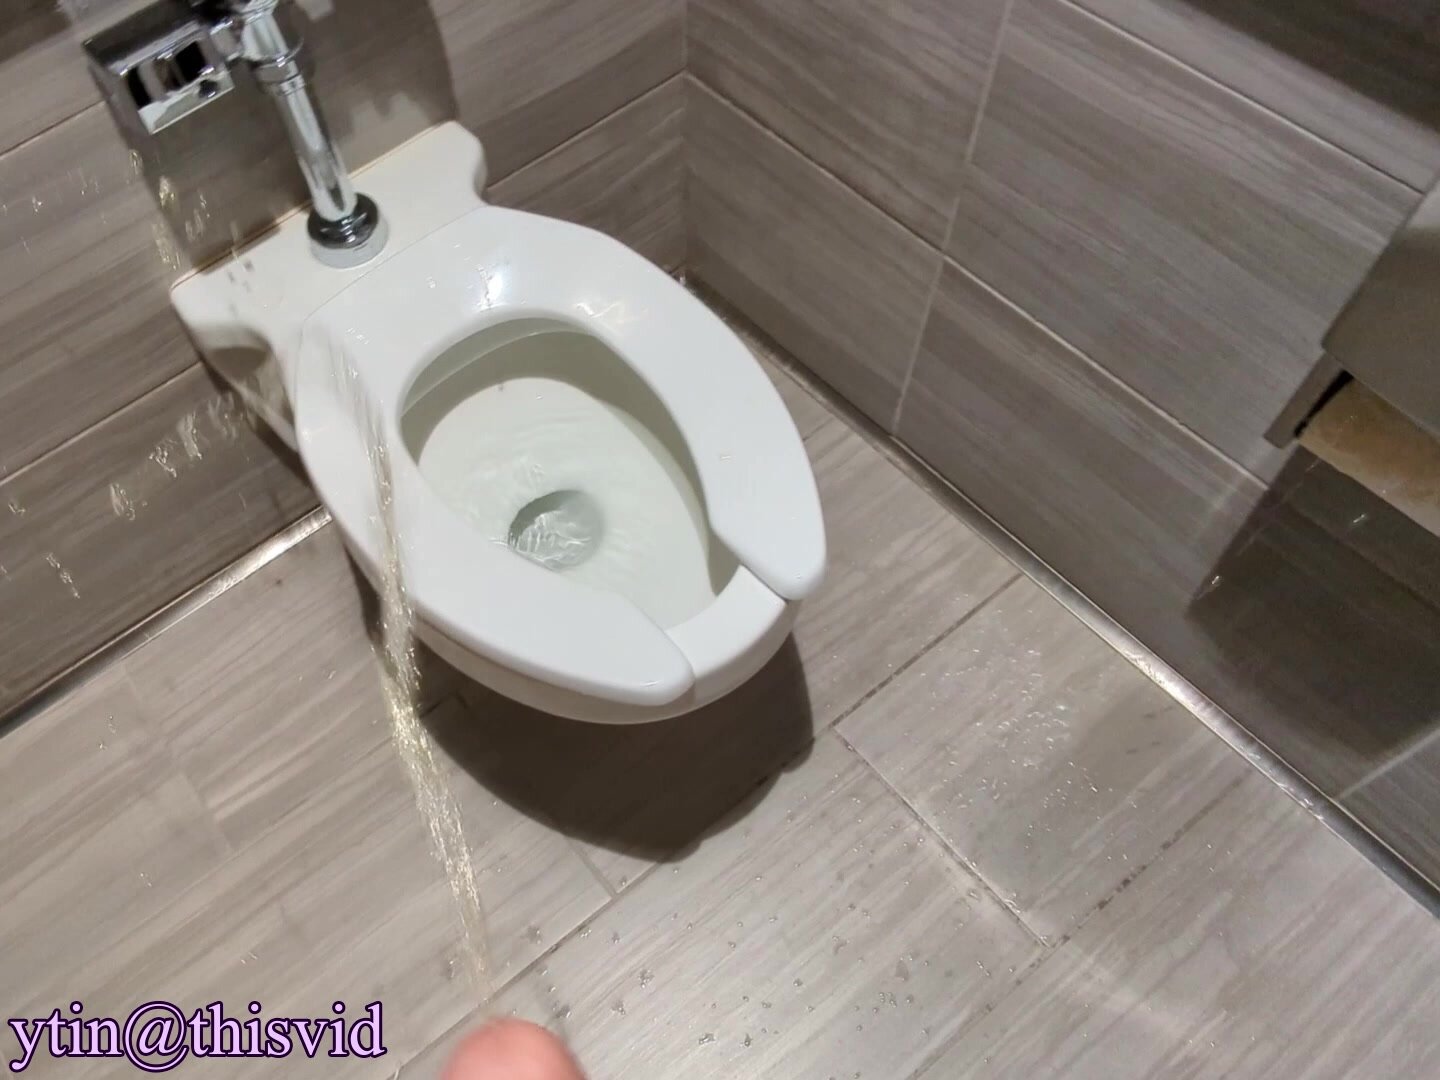 Public Restroom Piss Around Stall and on Toilet Paper